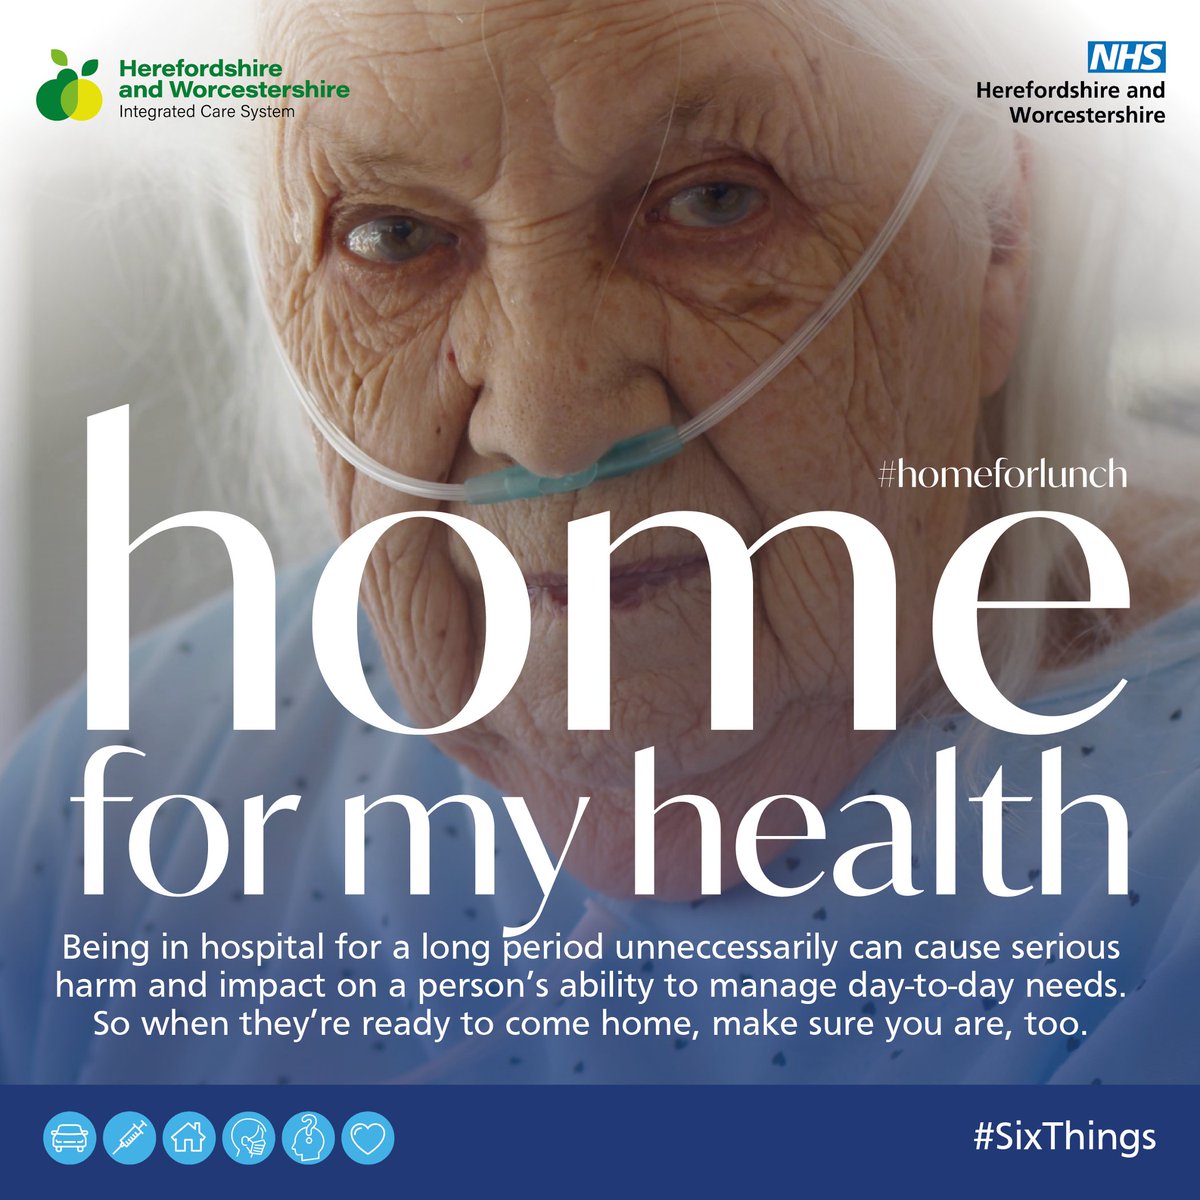 Staying in a hospital bed longer than needed can have a negative impact on someone's mental and physical wellbeing. Help us get you home sooner by planning your journey in advance, so we can get you #HomeForLunch Read more: hwics.org.uk/our-services/h…